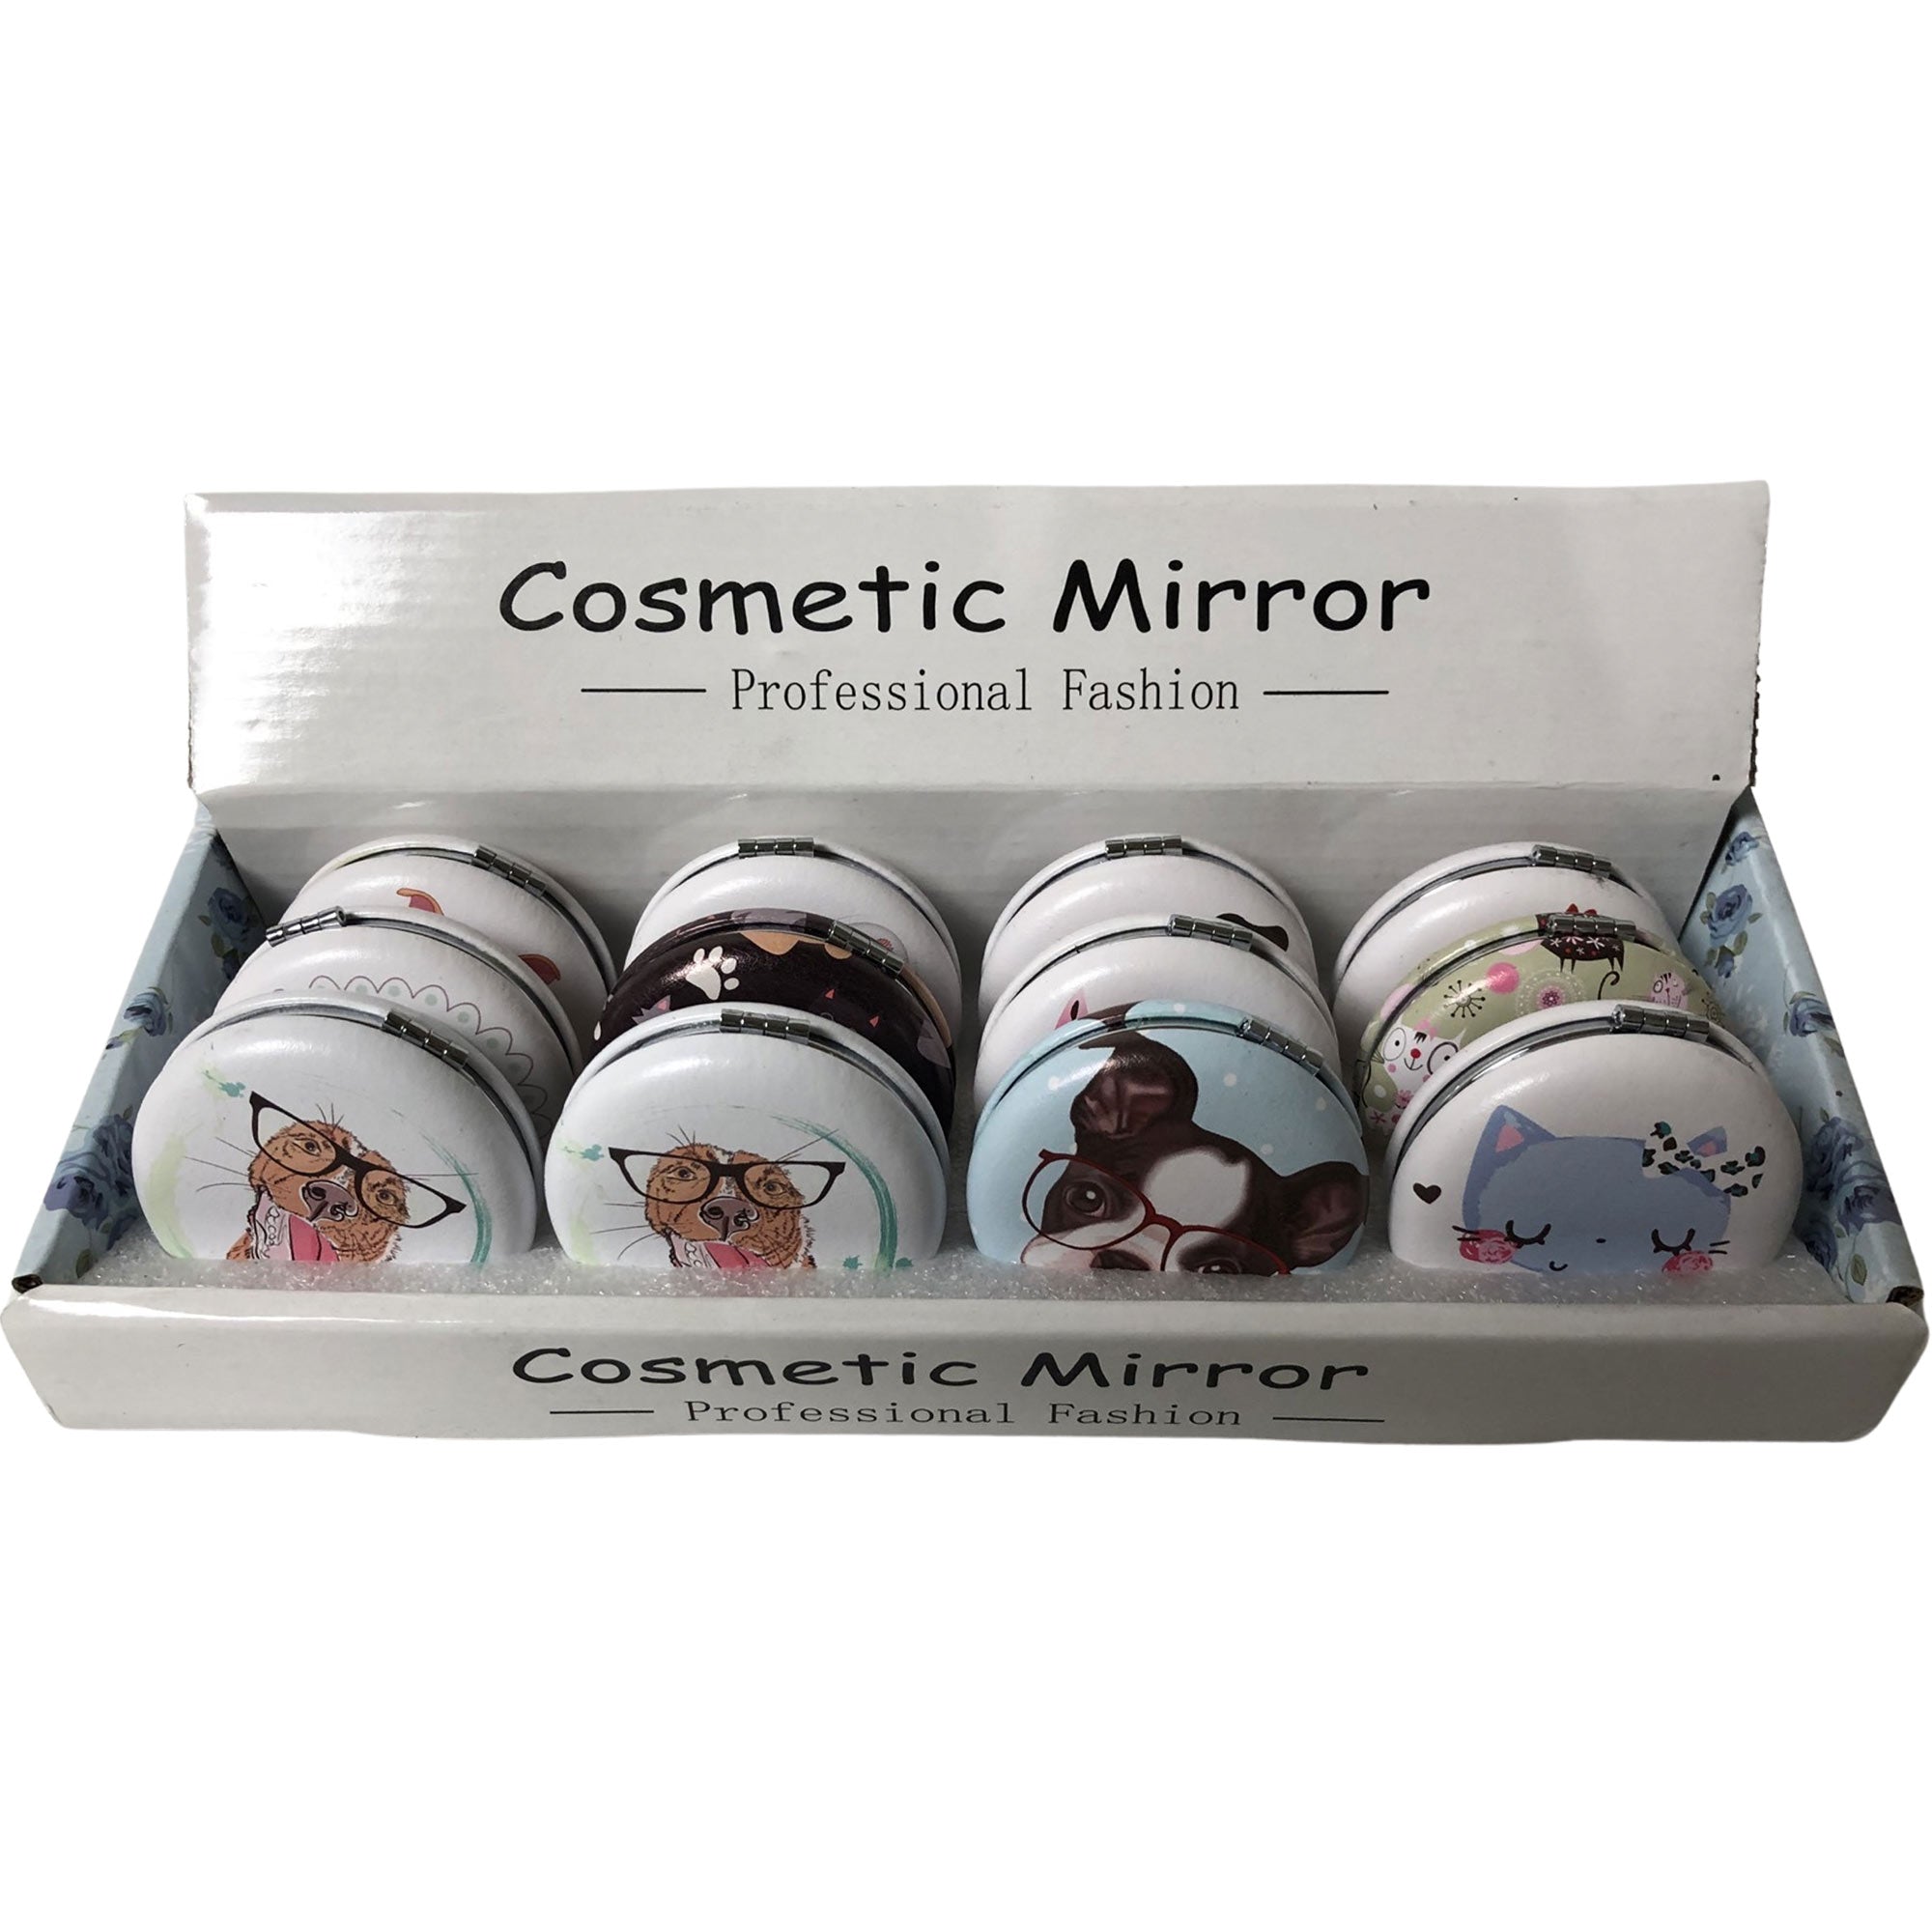 CLEARANCE ROUND COSMETIC MIRRORS CAT & DOG PRINTS (CASE OF 48 - $1.50 / PIECE)  Wholesale Cosmetic Mirrors in Assorted Prints SKU: 909-CAT-DOG-48